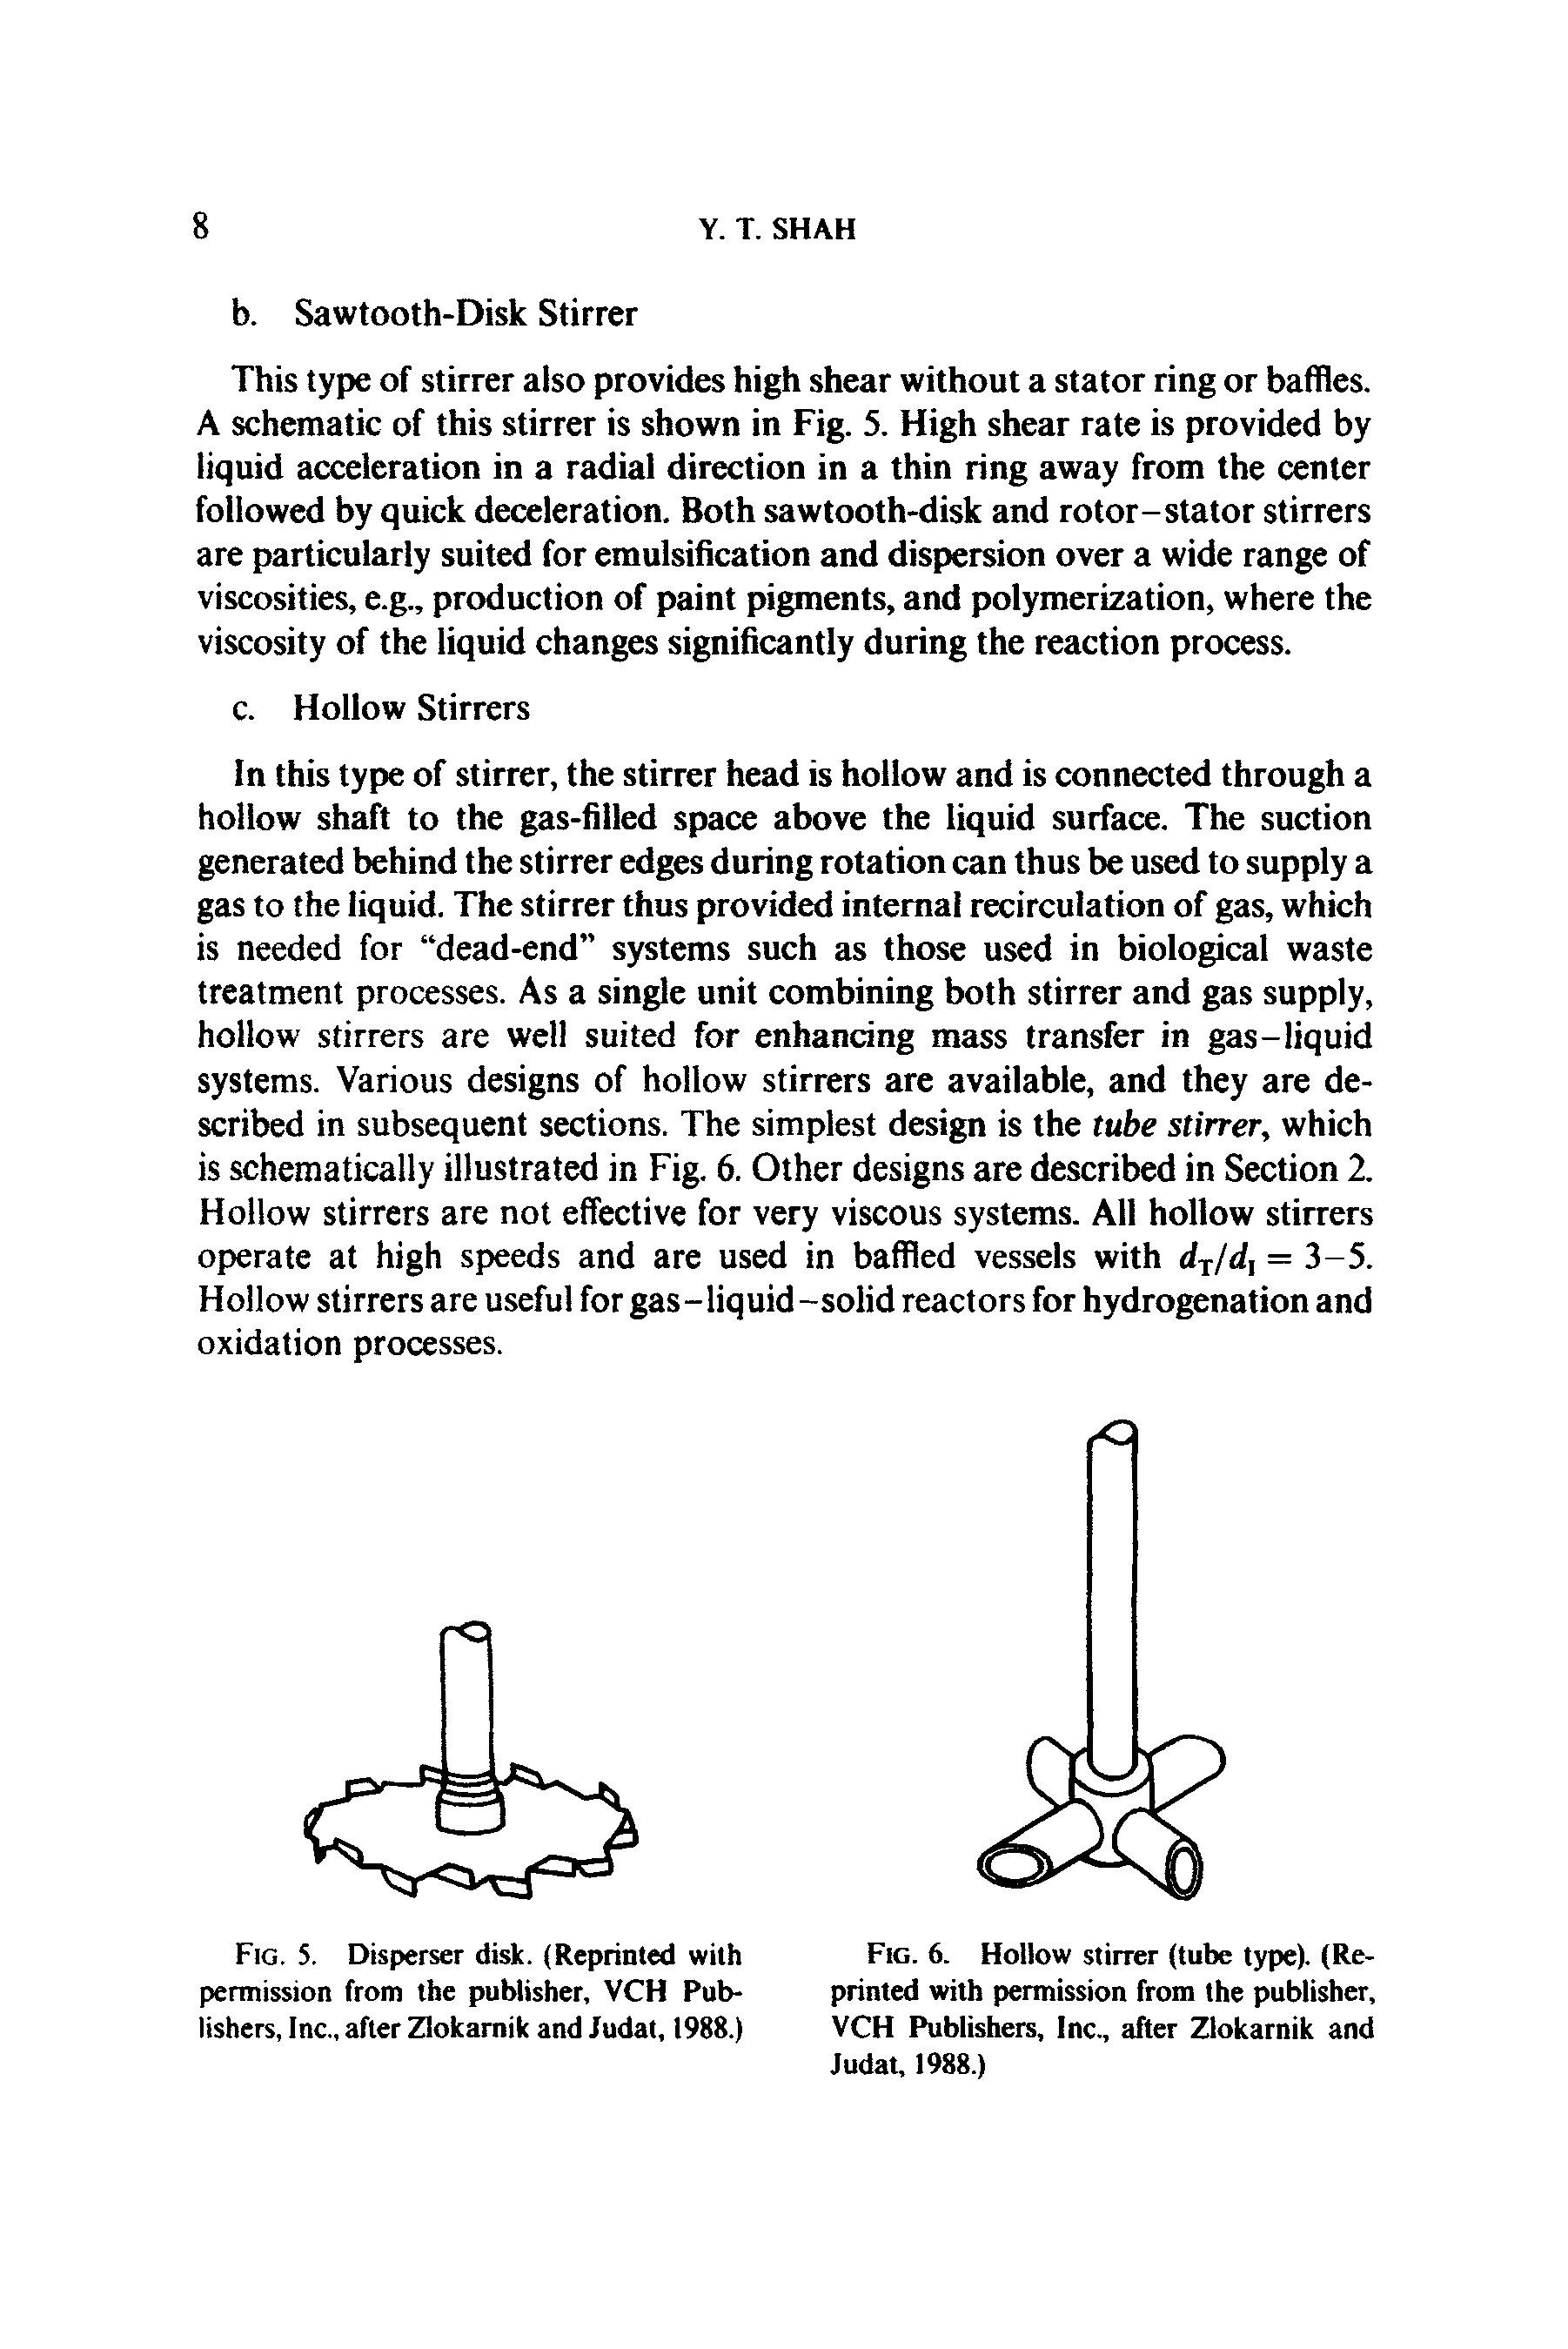 Fig. 6. Hollow stirrer (tube type). (Reprinted with permission from the publisher, VCH Publishers, Inc., after Zlokarnik and Judat, 1988.)...